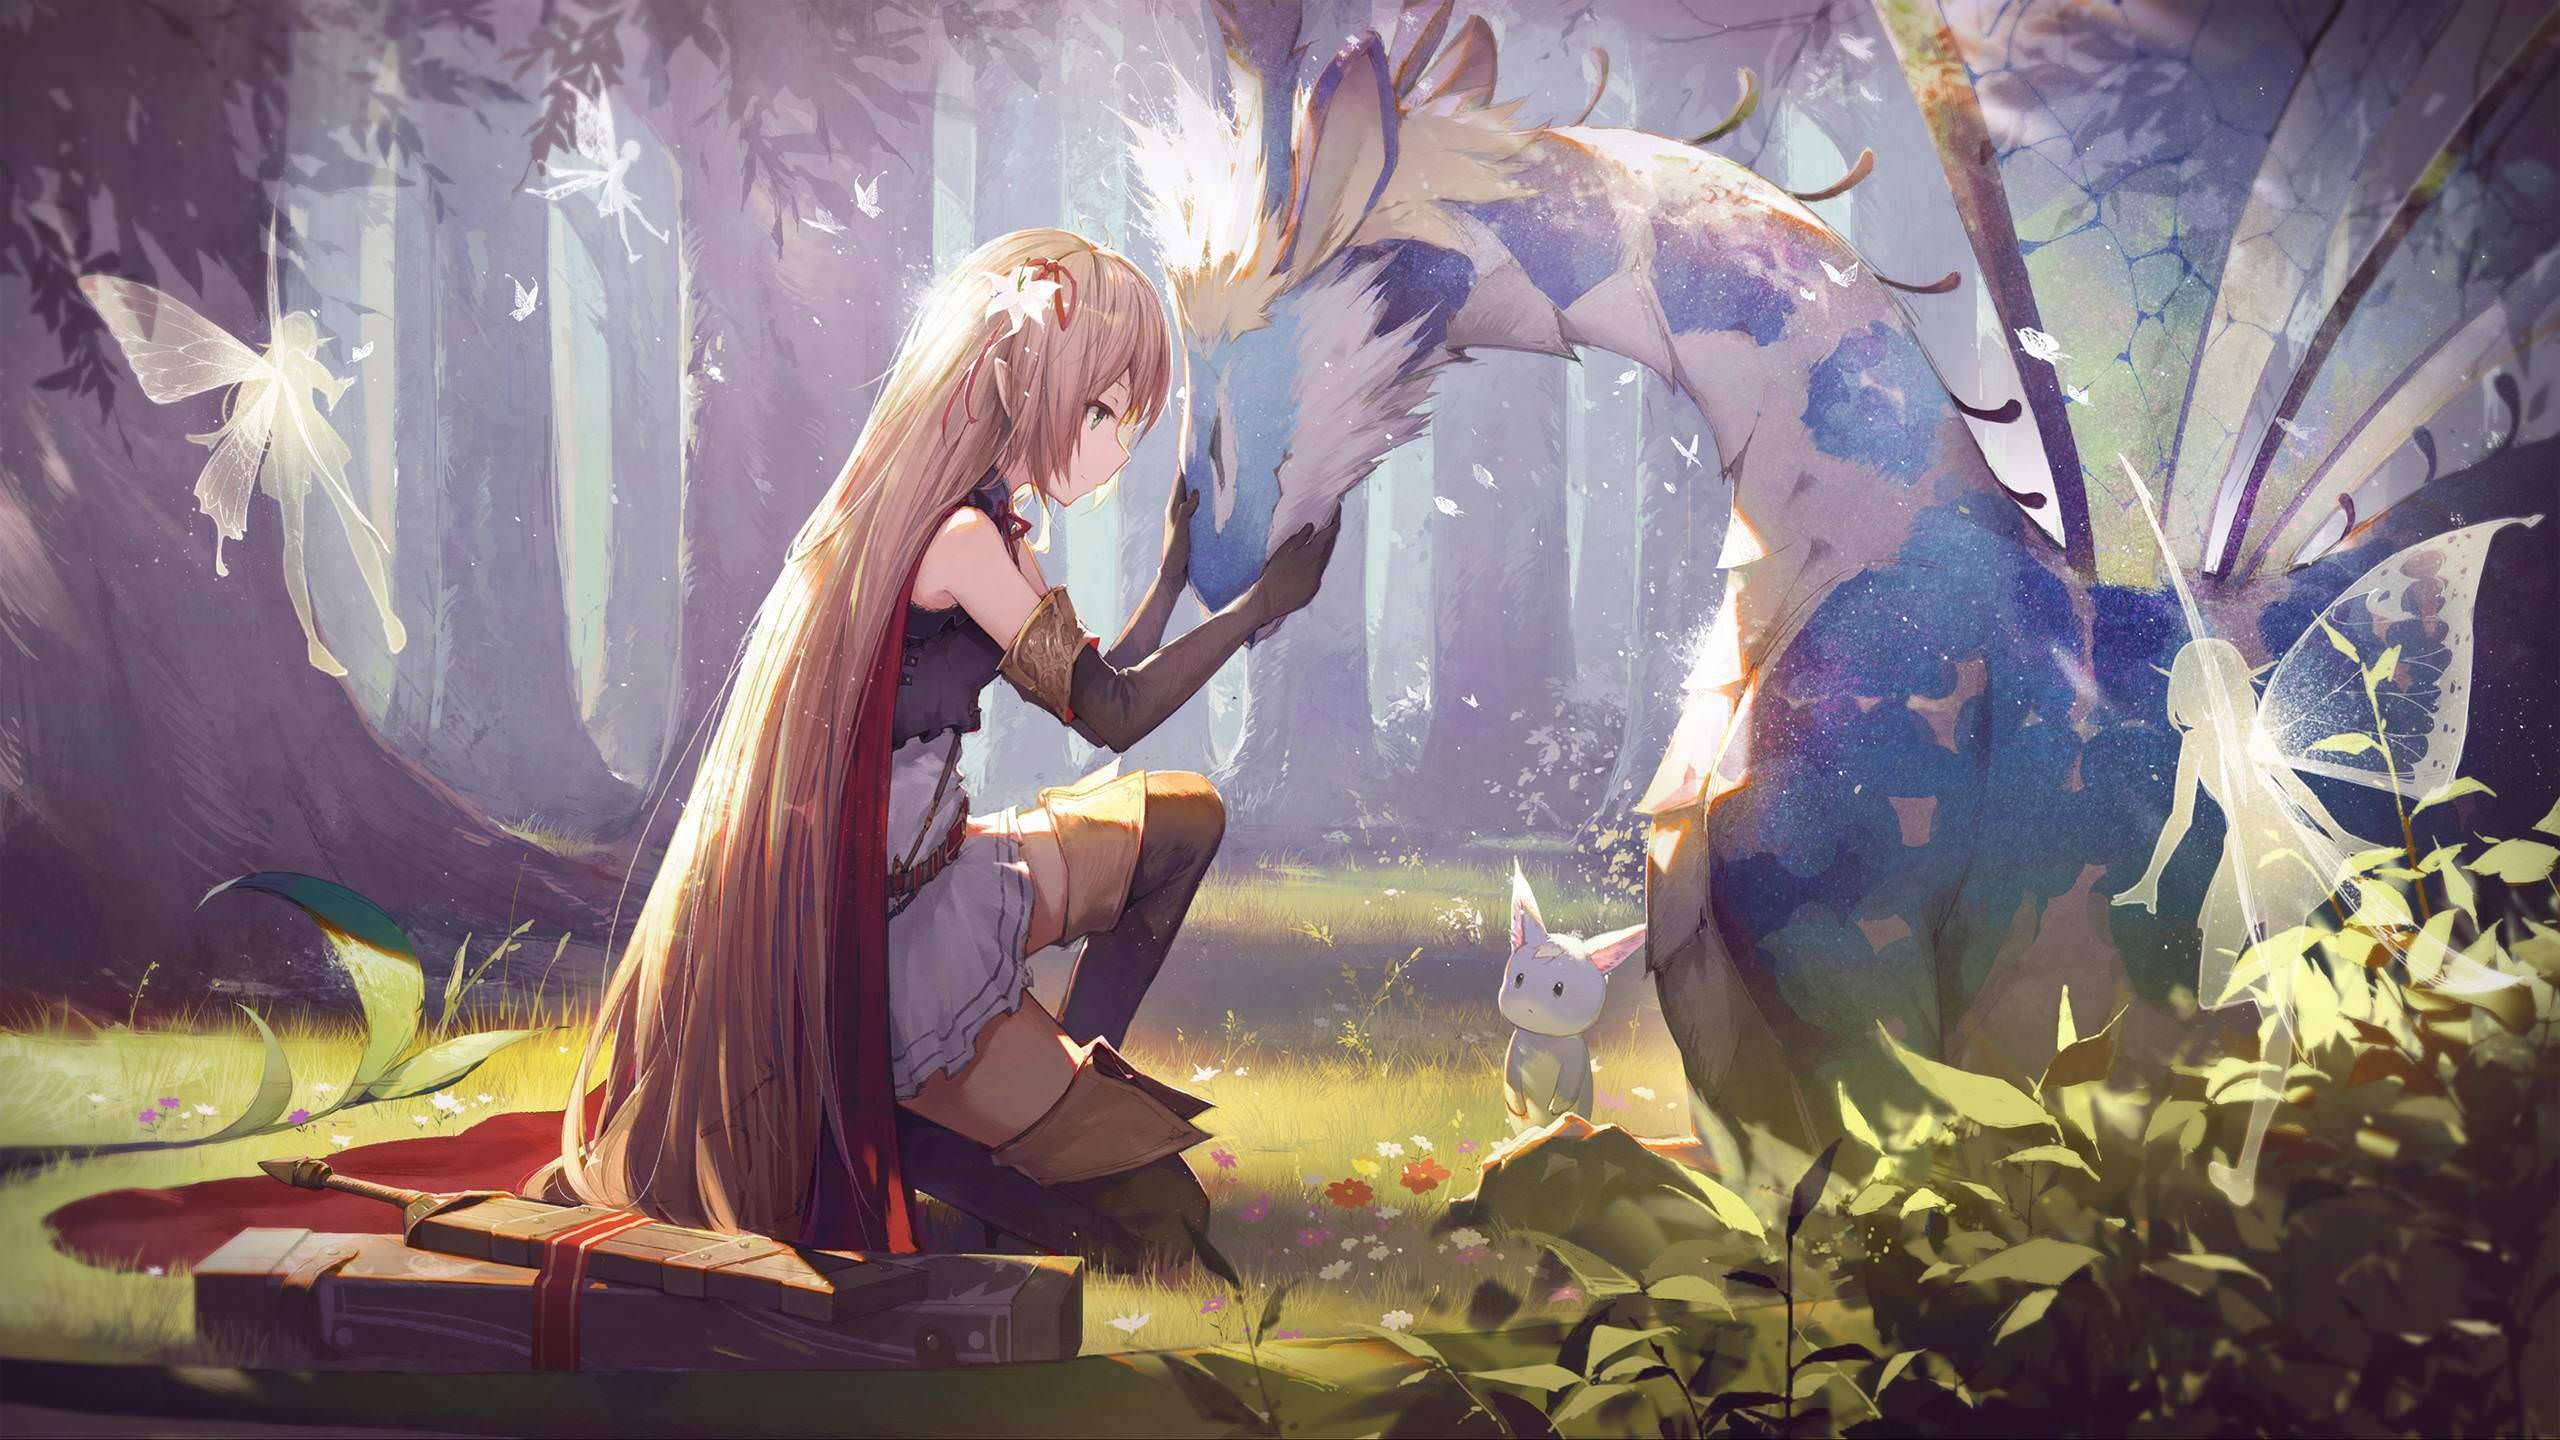 A Girl Is Sitting Next To A Dragon In The Forest Background